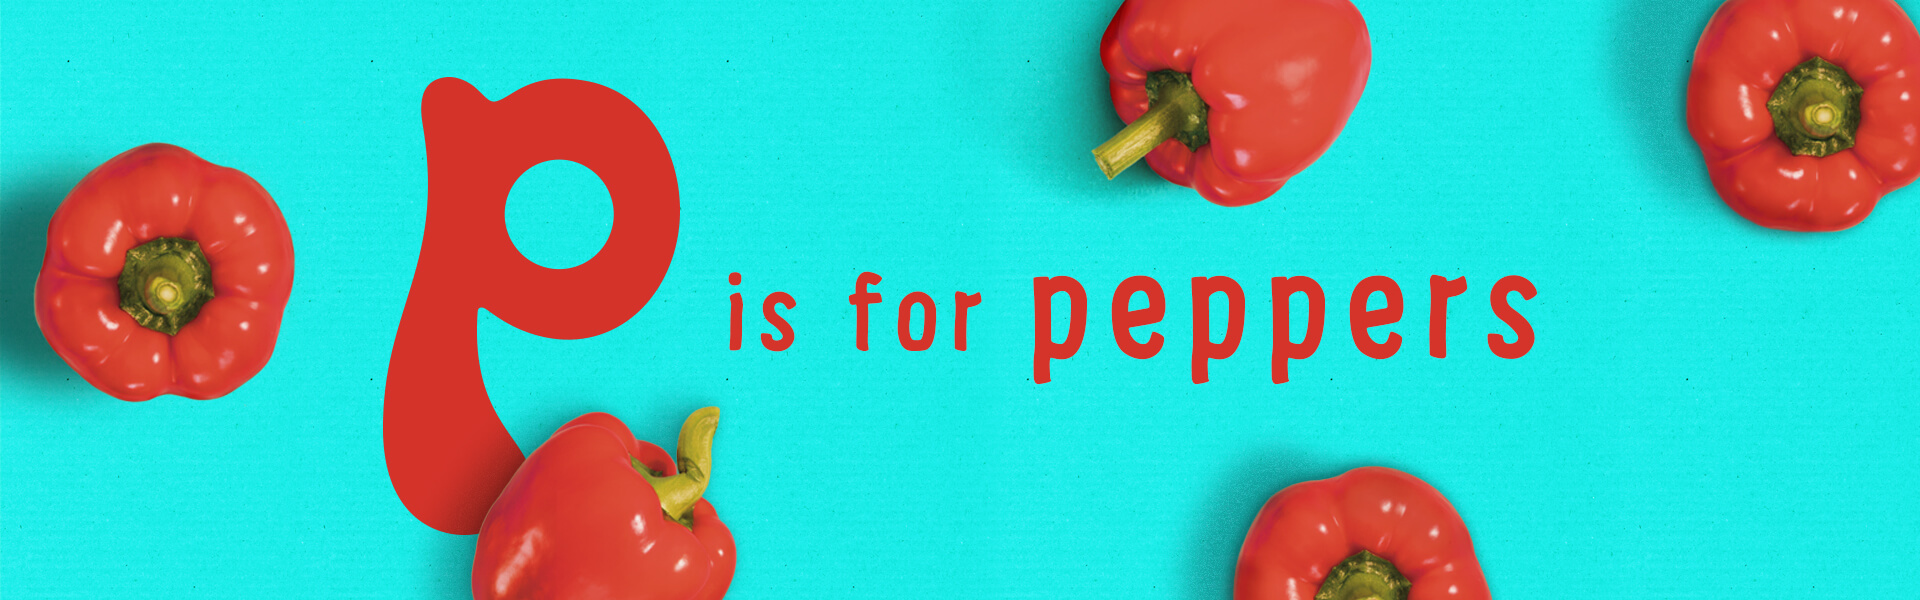 Organix p is for peppers